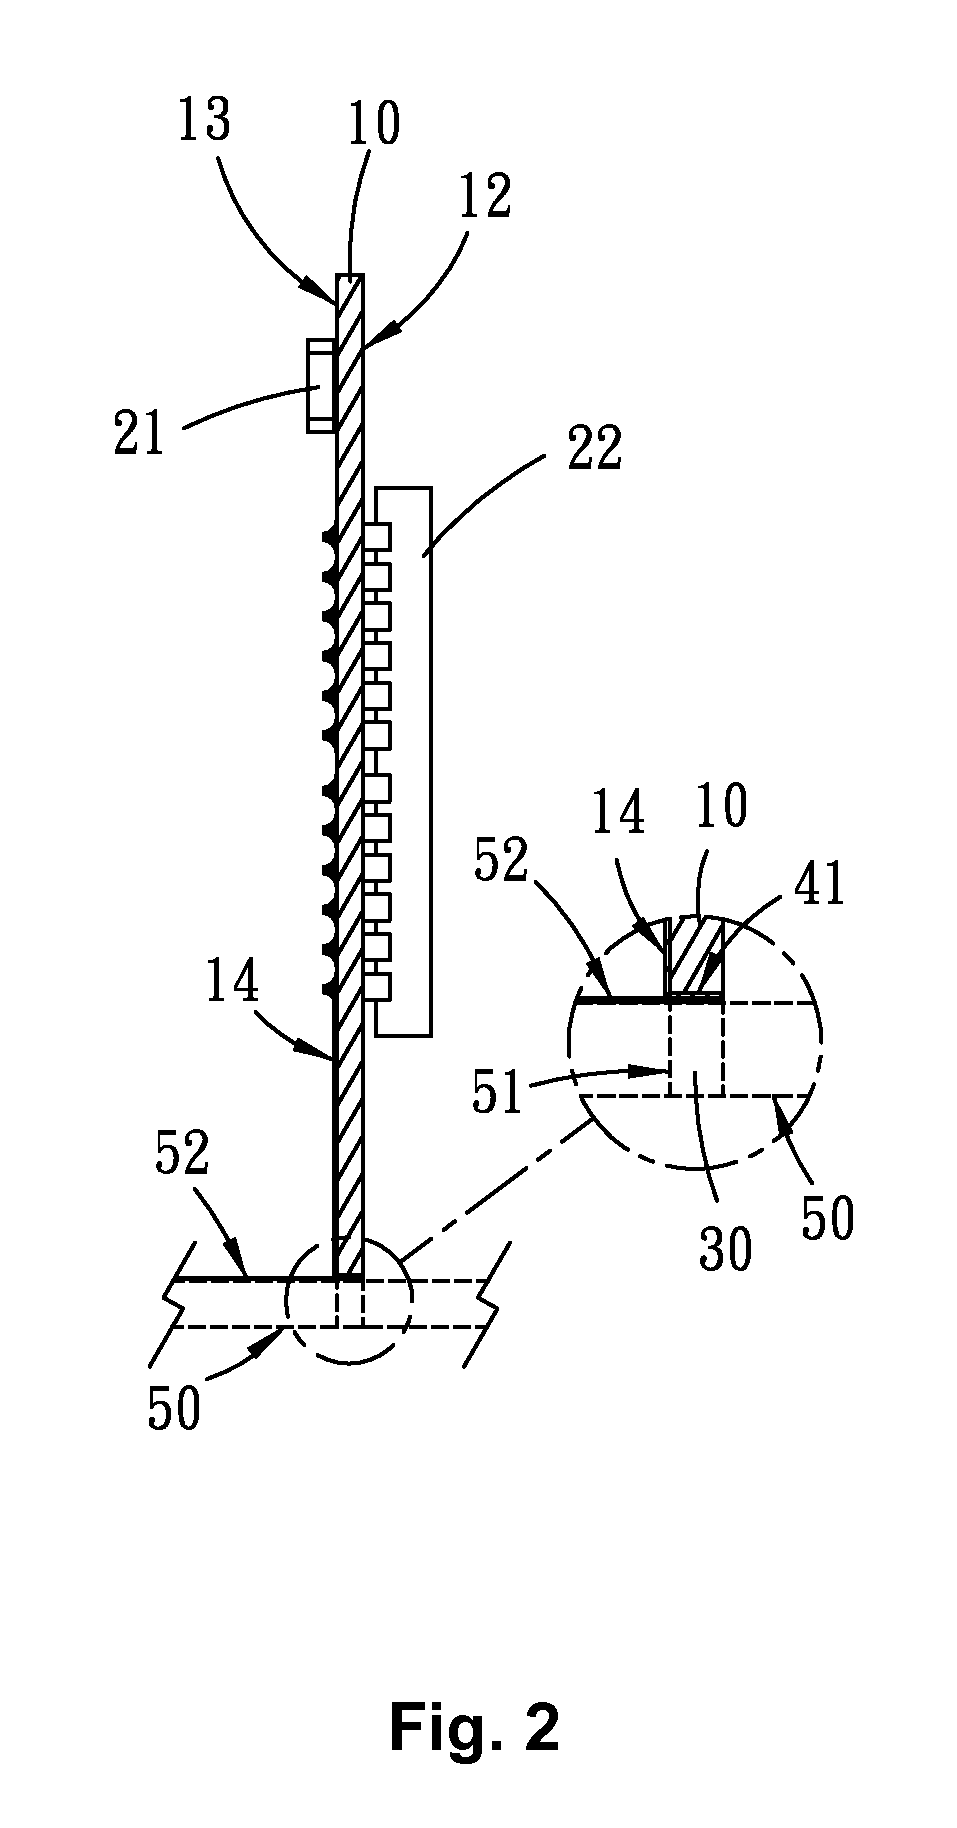 Circuit module having surface-mount pads on a lateral surface for connecting with a circuit board